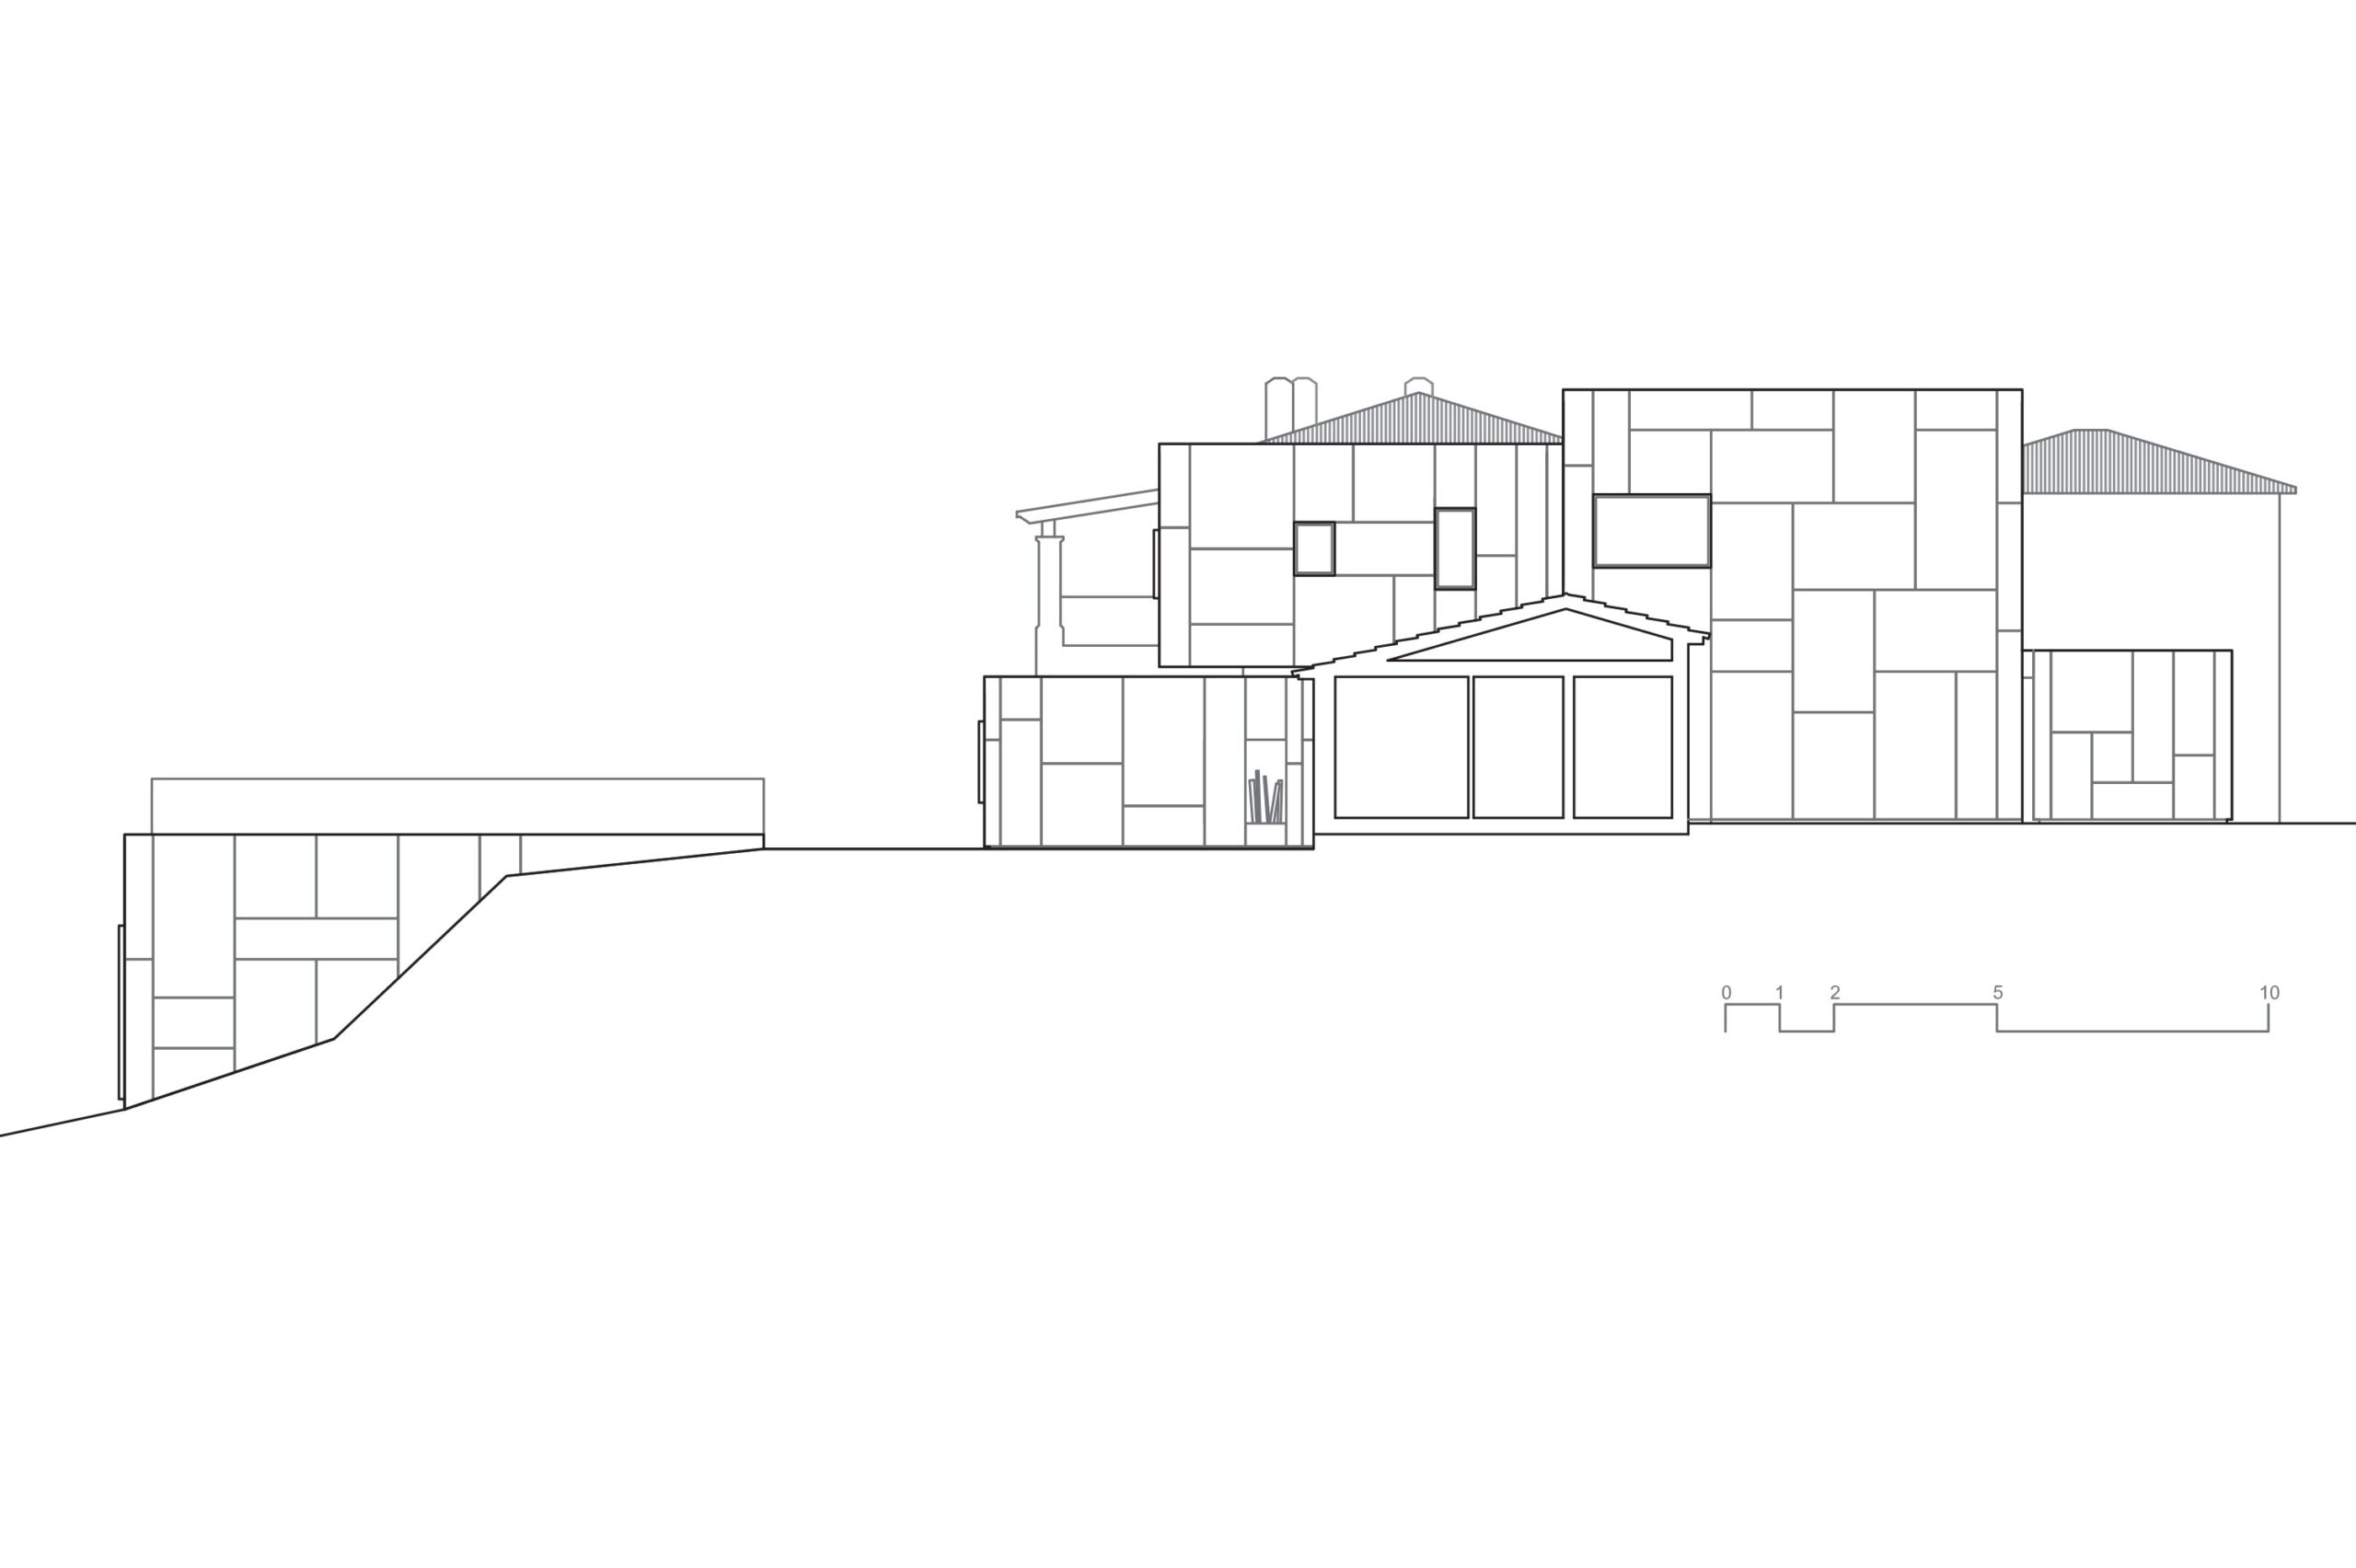 East elevation's drawing of the project